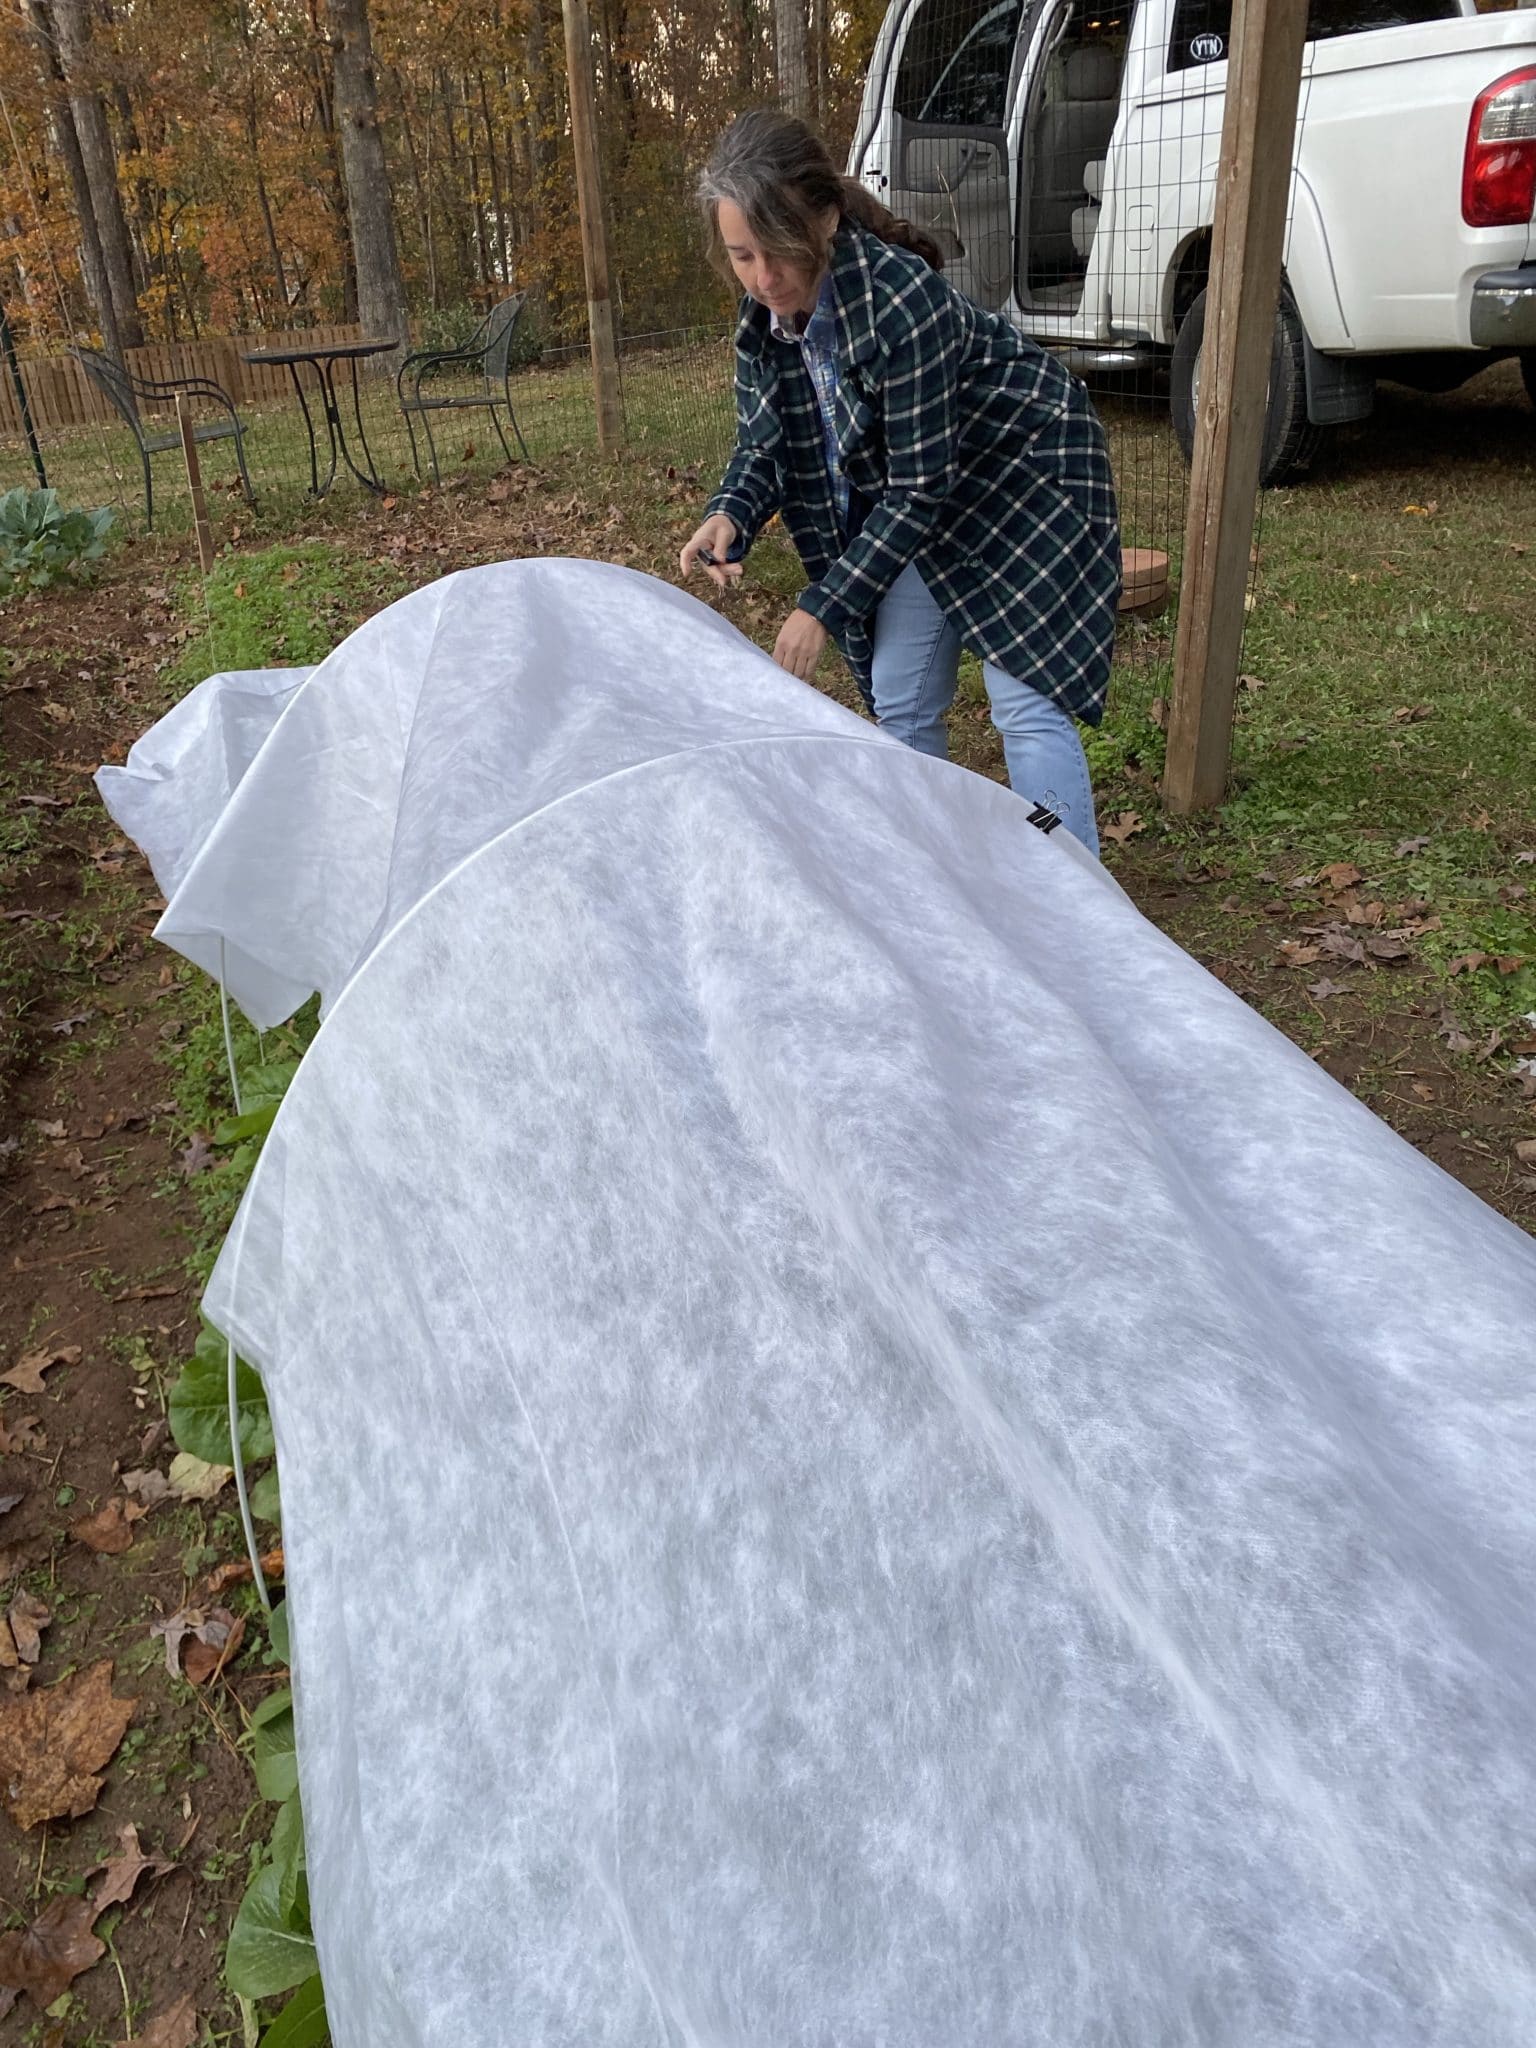 Kristy putting the agricloth over the tender greens of a winter garden